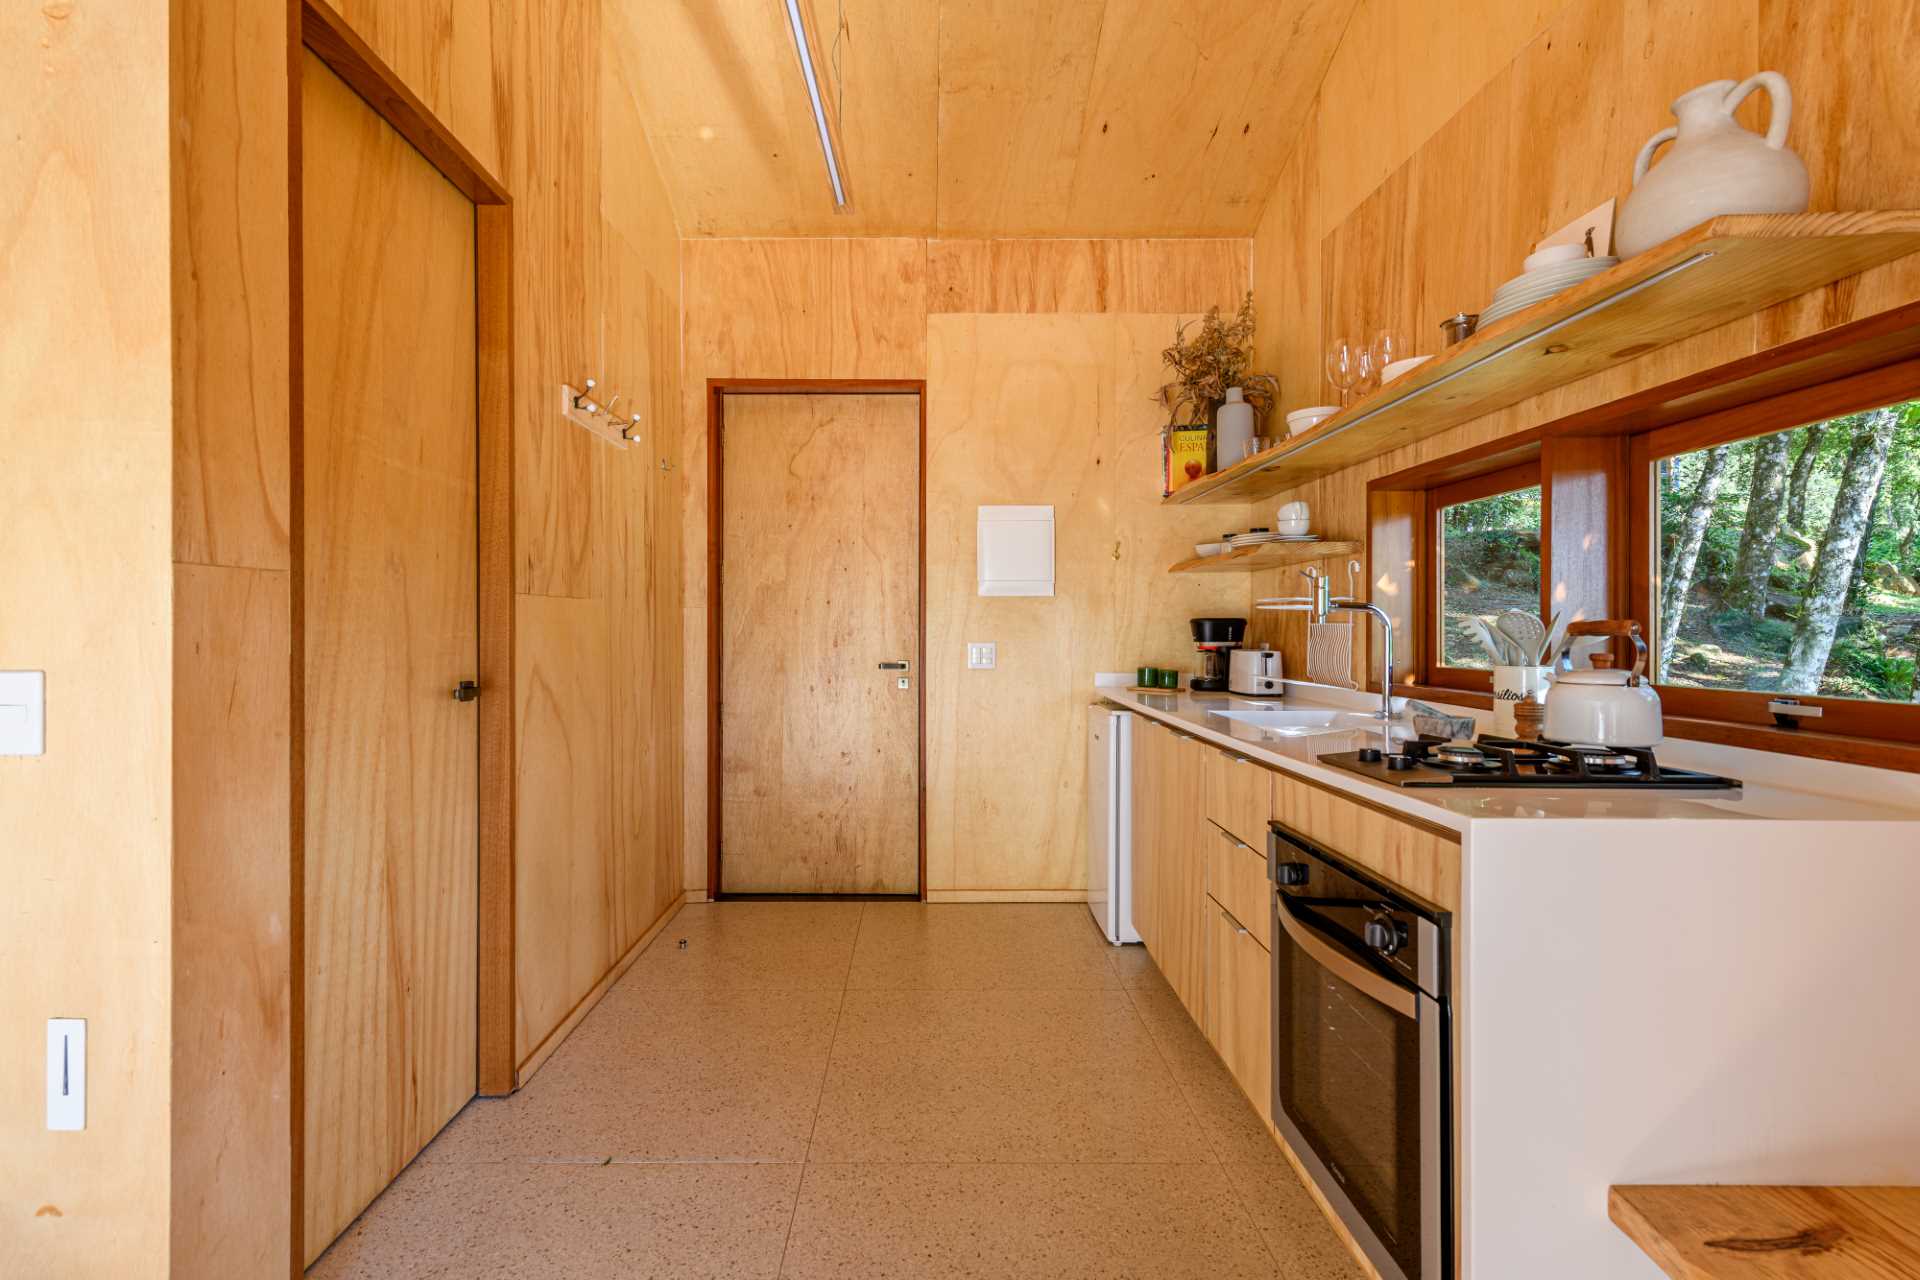 A modern tree house kitchen that includes wood cabinets, a white countertop, and floating shelves that provide additional storage.